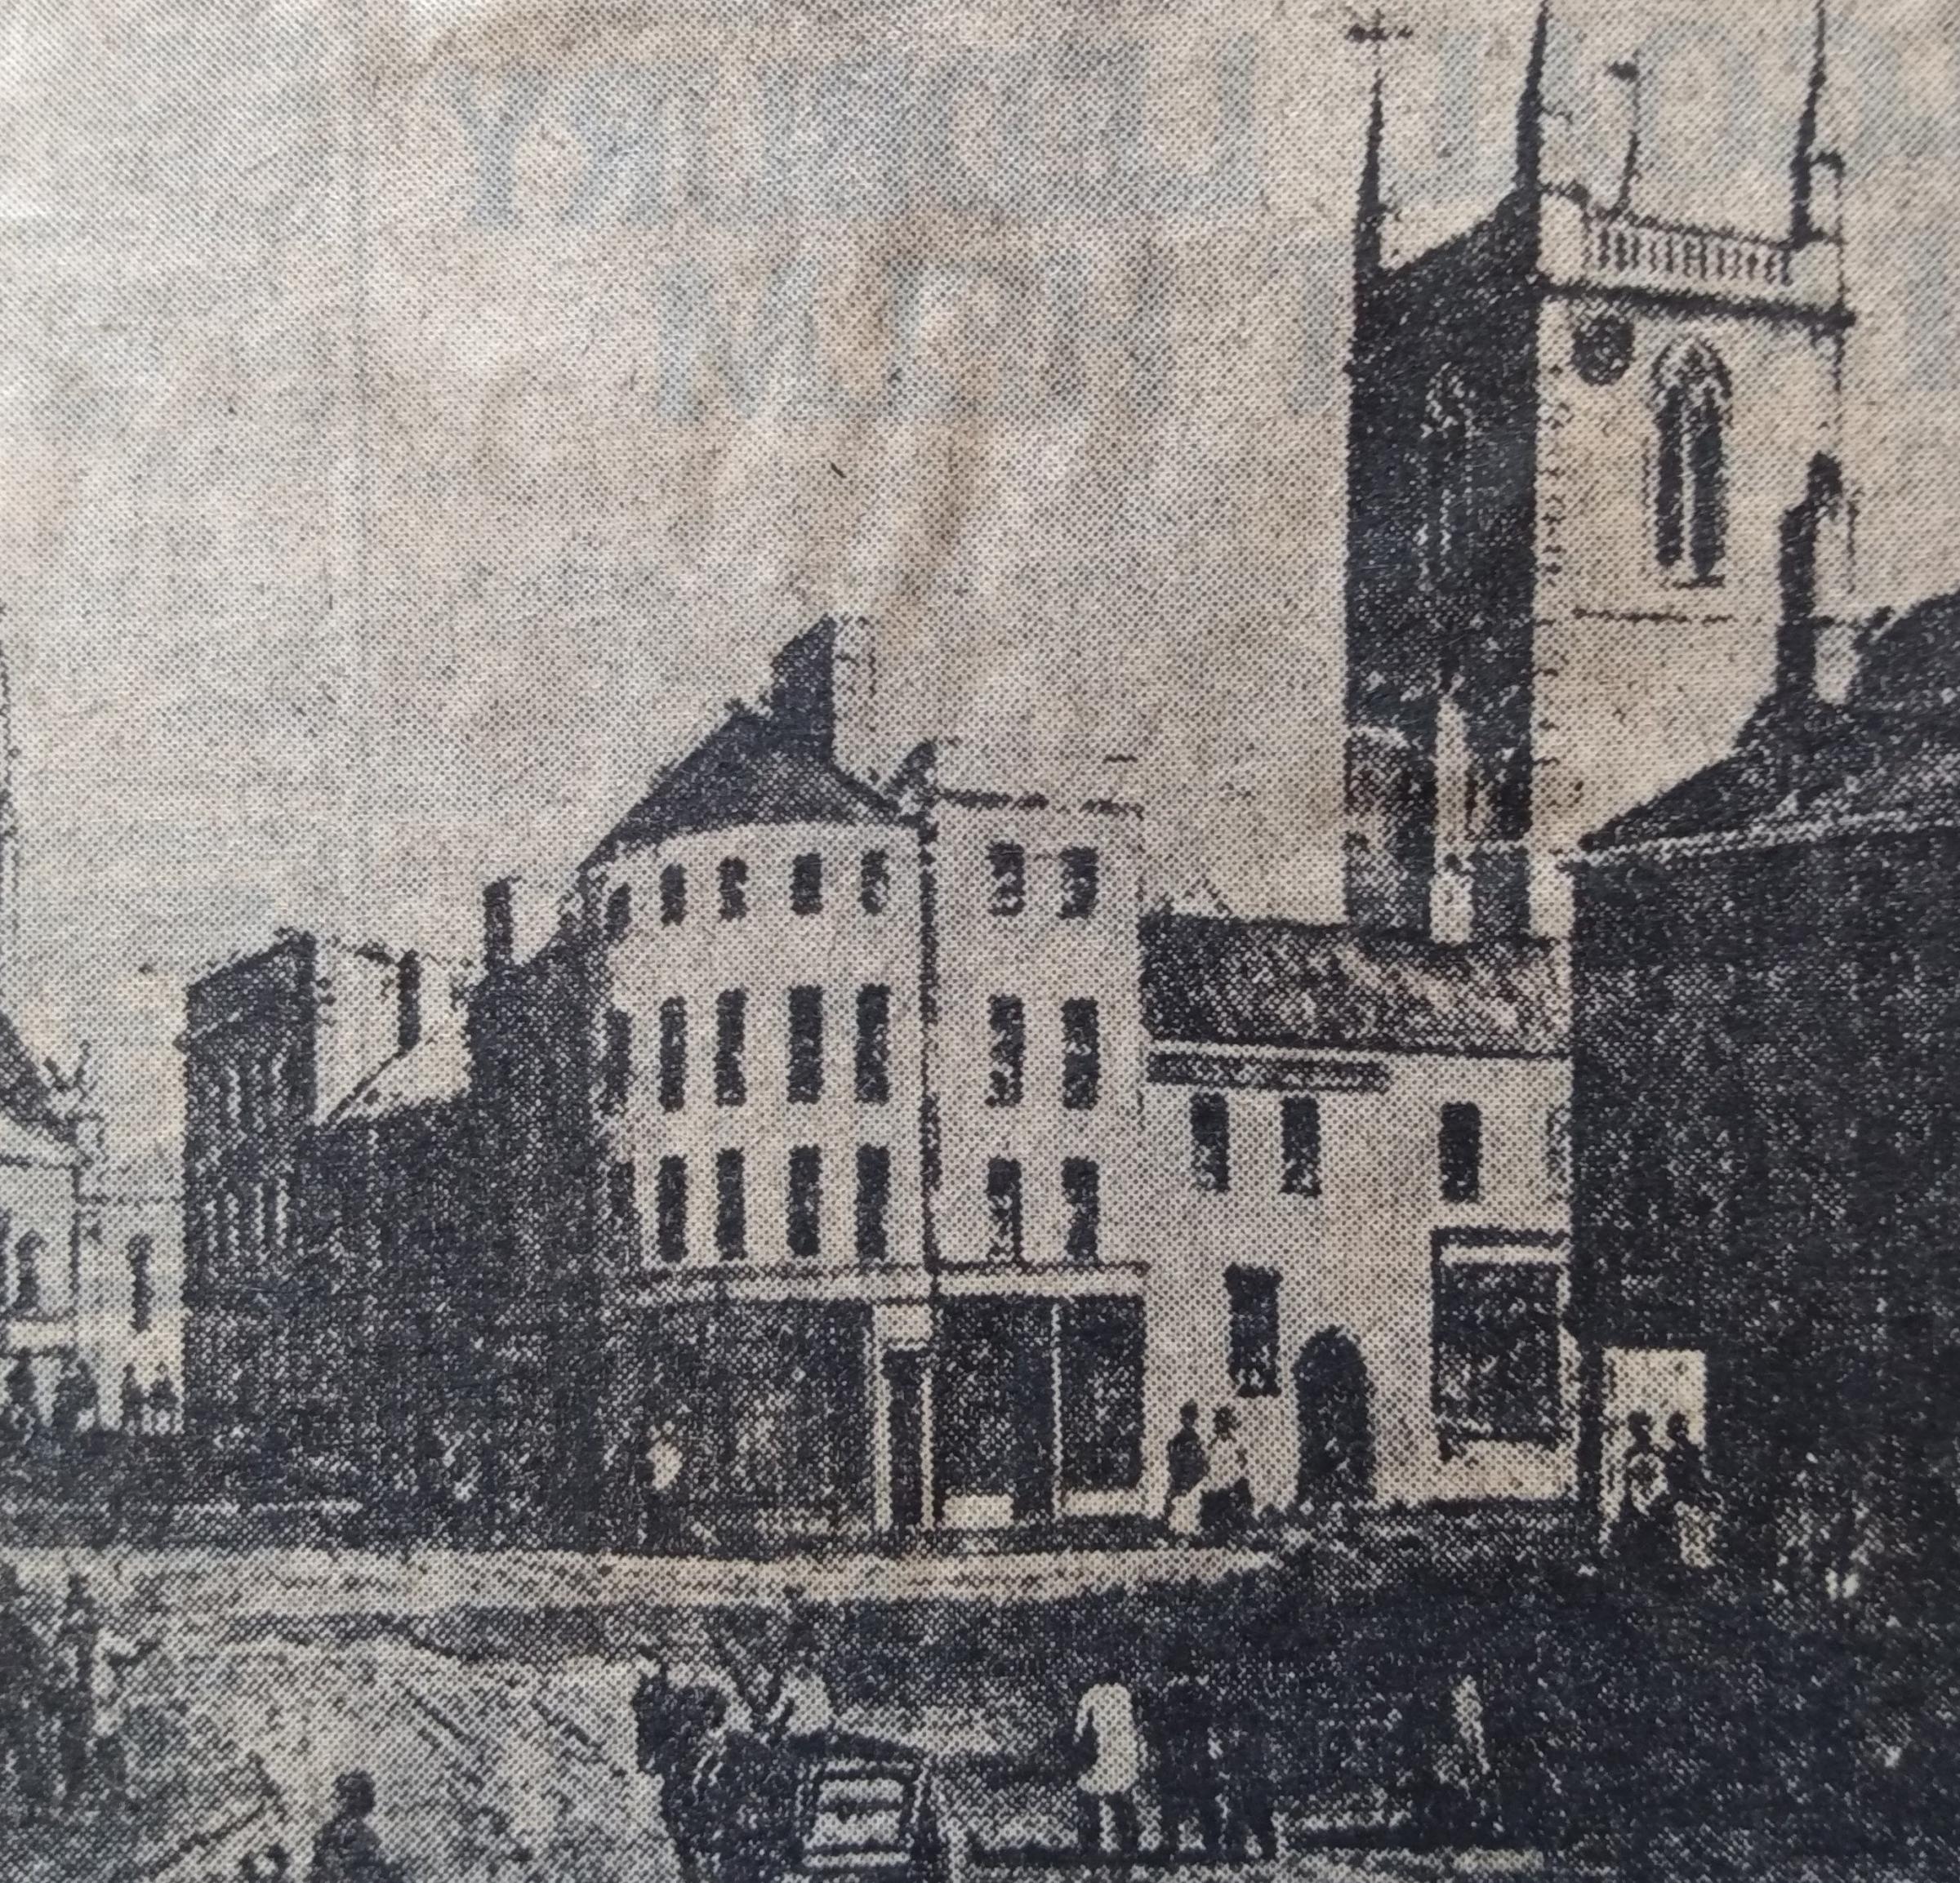 This picture was reproduced in the Worcester News and Times in 1958, looking up Mealcheapen Street, and was printed long before the Public Hall had even been built, far less demolished